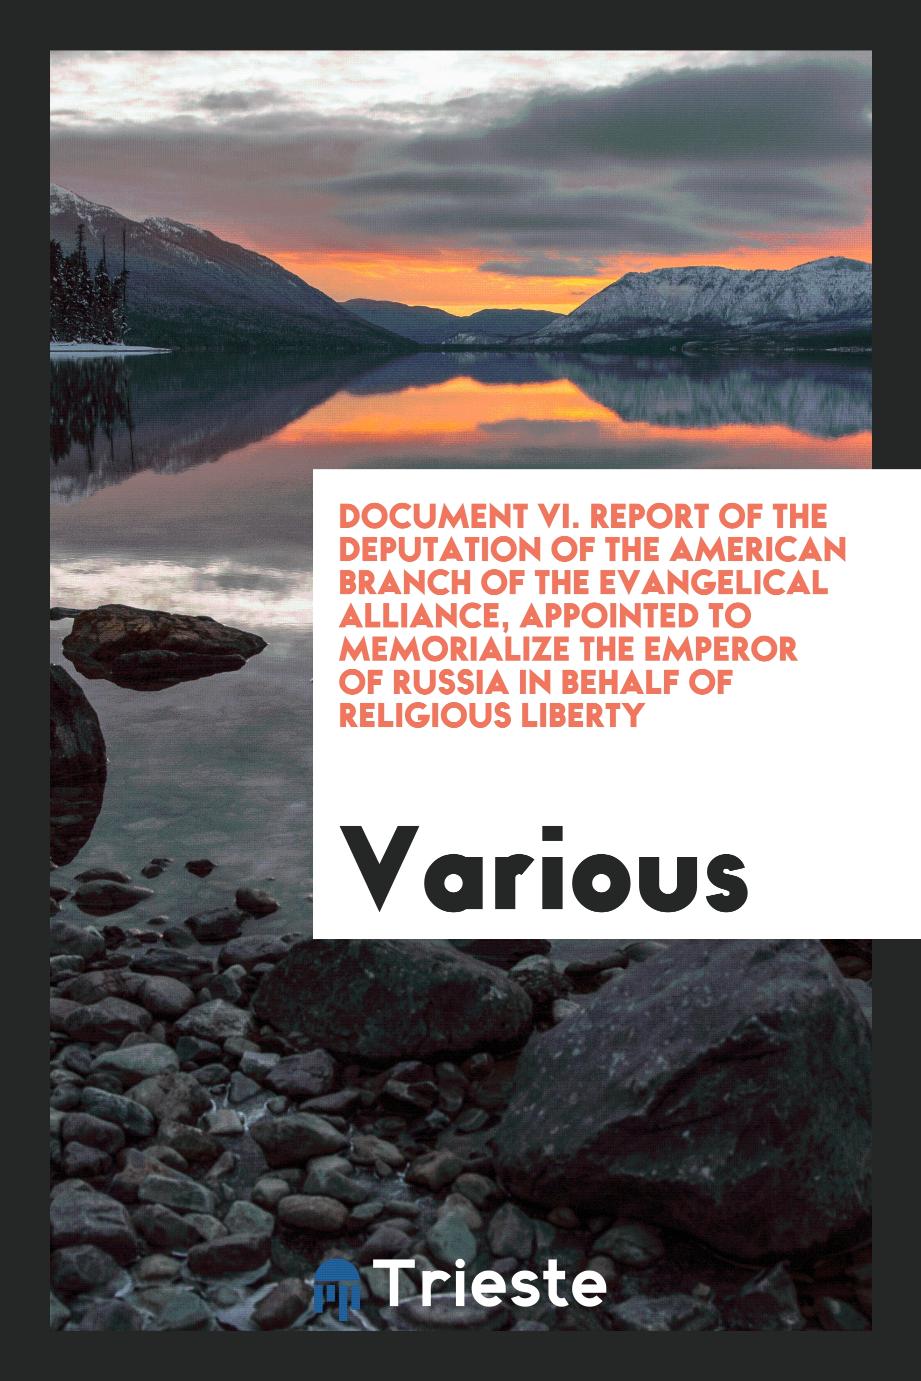 Document VI. Report of the Deputation of the American Branch of the Evangelical Alliance, Appointed to Memorialize the Emperor of Russia in Behalf of Religious Liberty